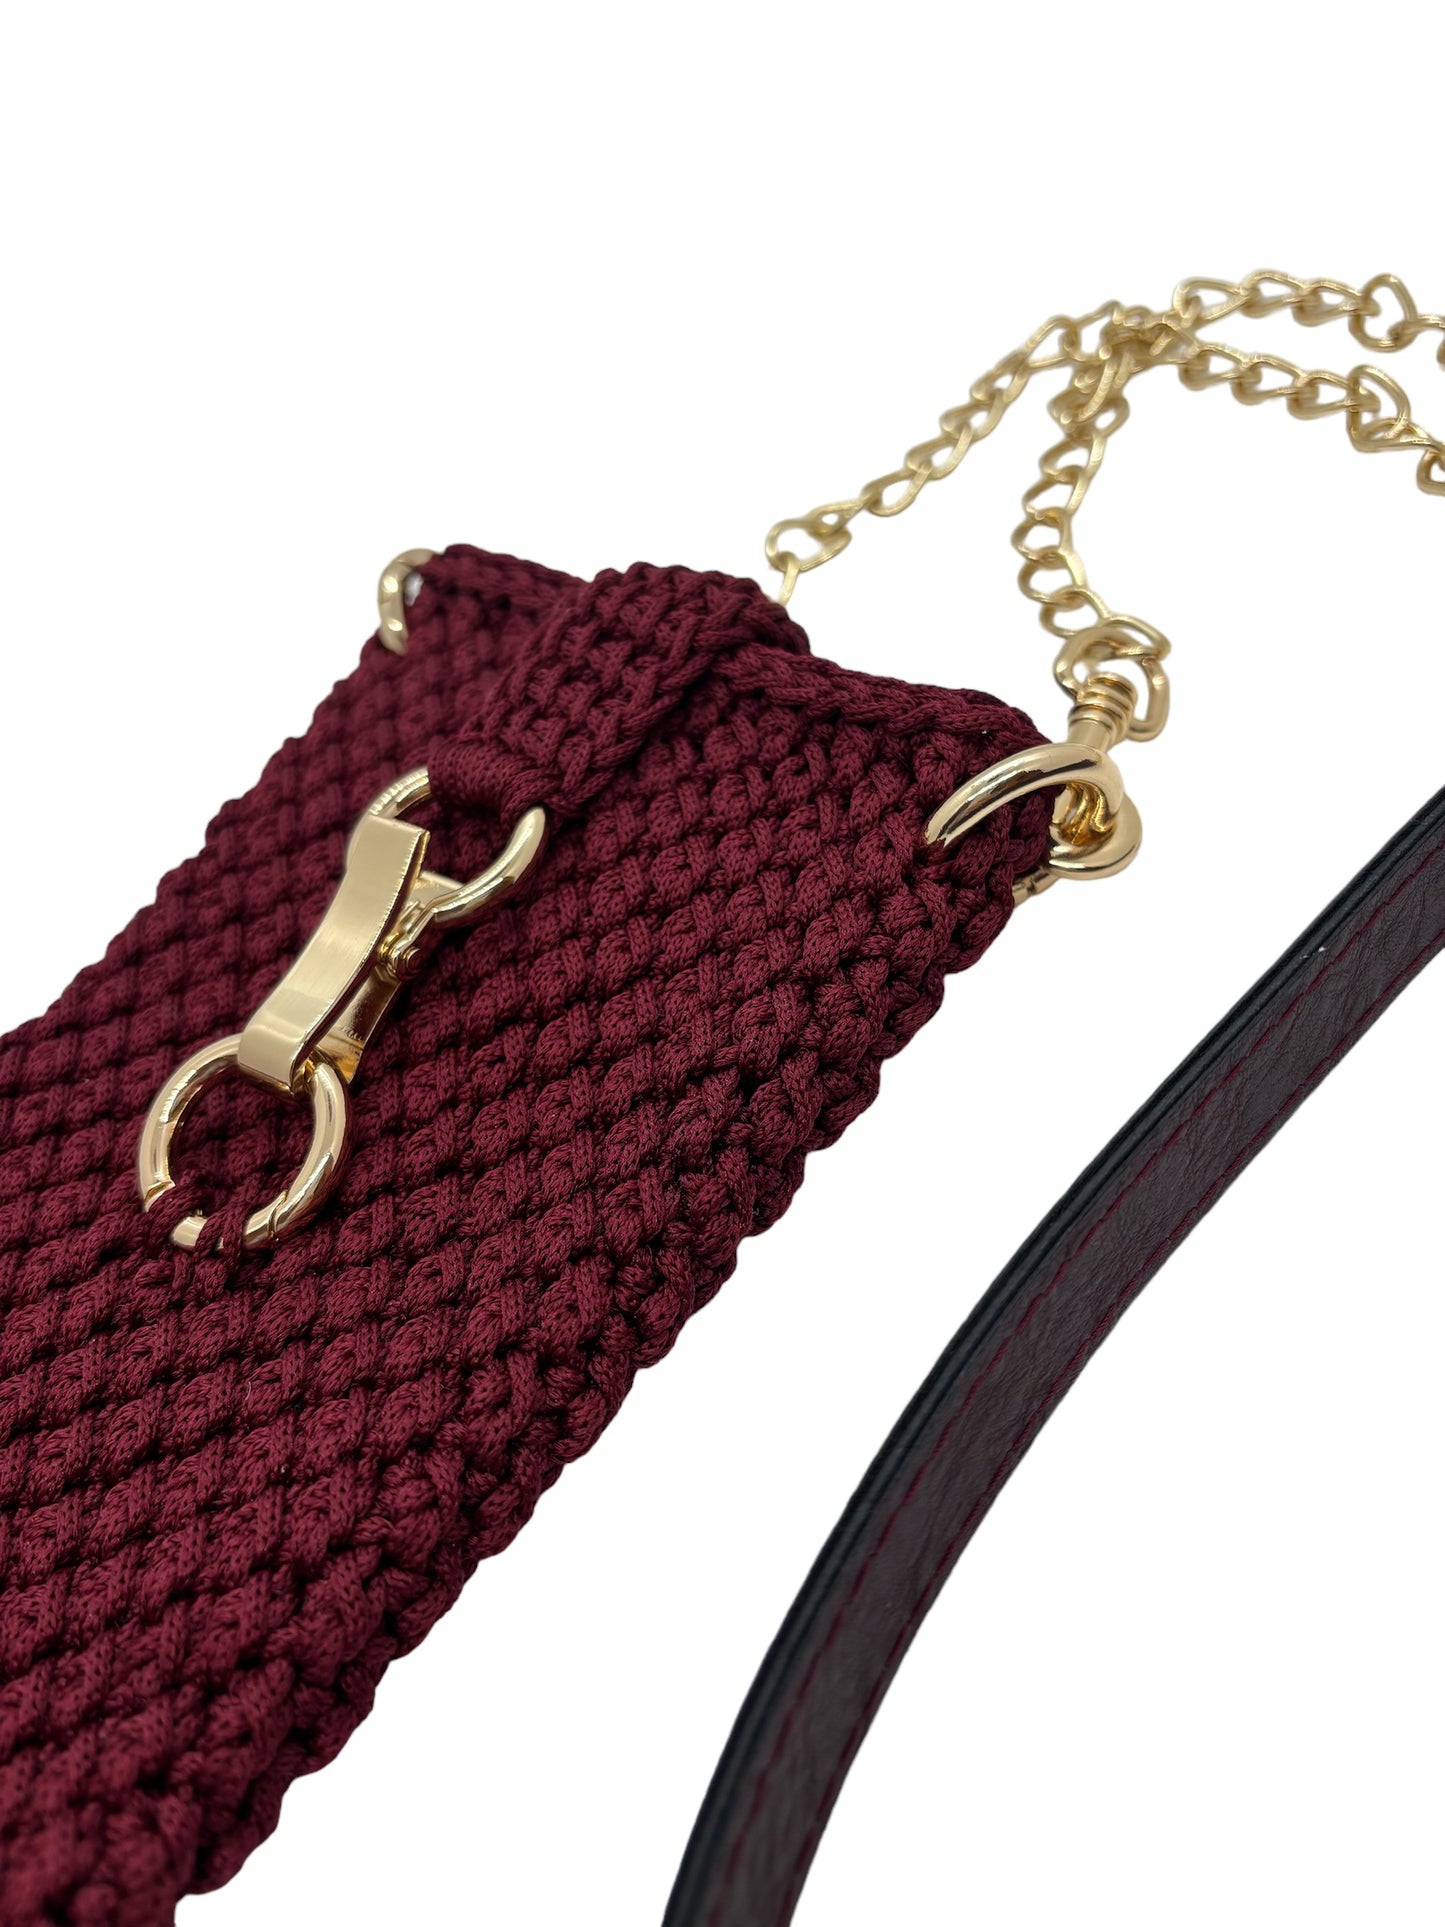 Trendy phone pouch with ECO leather/ metal chain strap